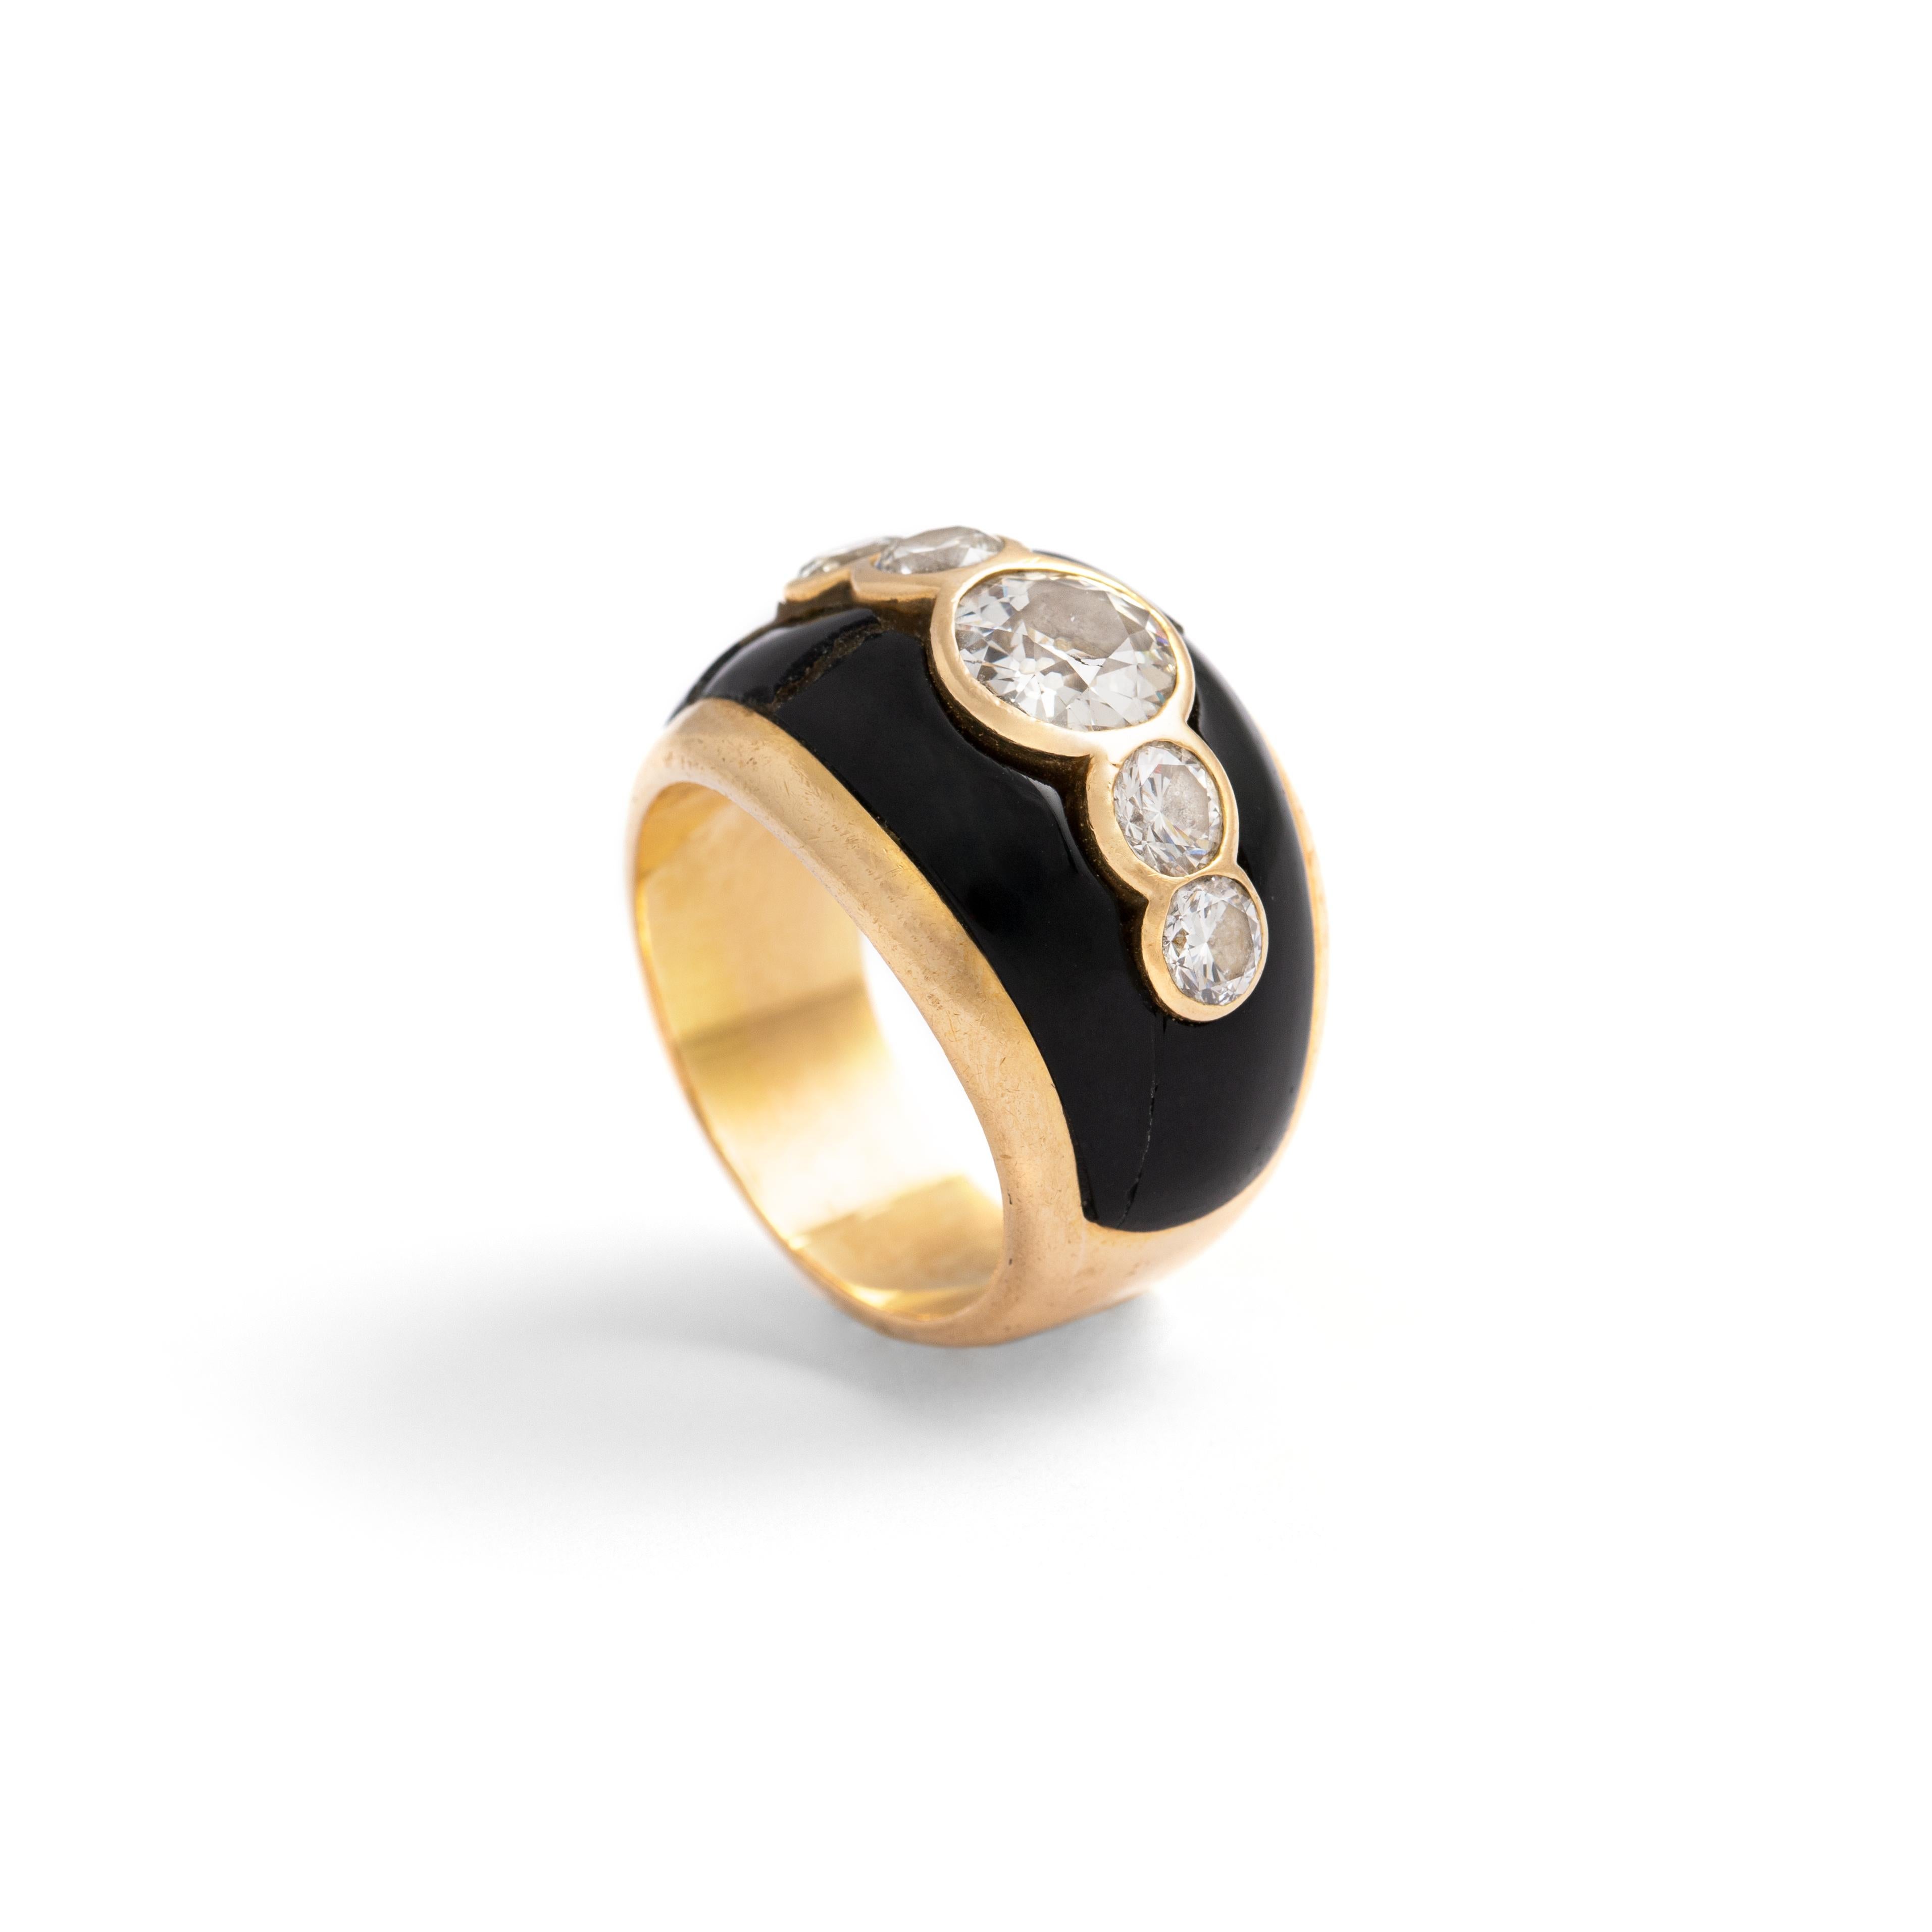 Old mine cut Diamond Onyx Yellow Gold 18K Ring.
Diamond central round old mine cut: approximately estimated 1.55 carat.
x4 smaller Diamonds round old mine cut: approximately estimated Total 2.00 carat.
Total weight: 18.91
Size: 60.